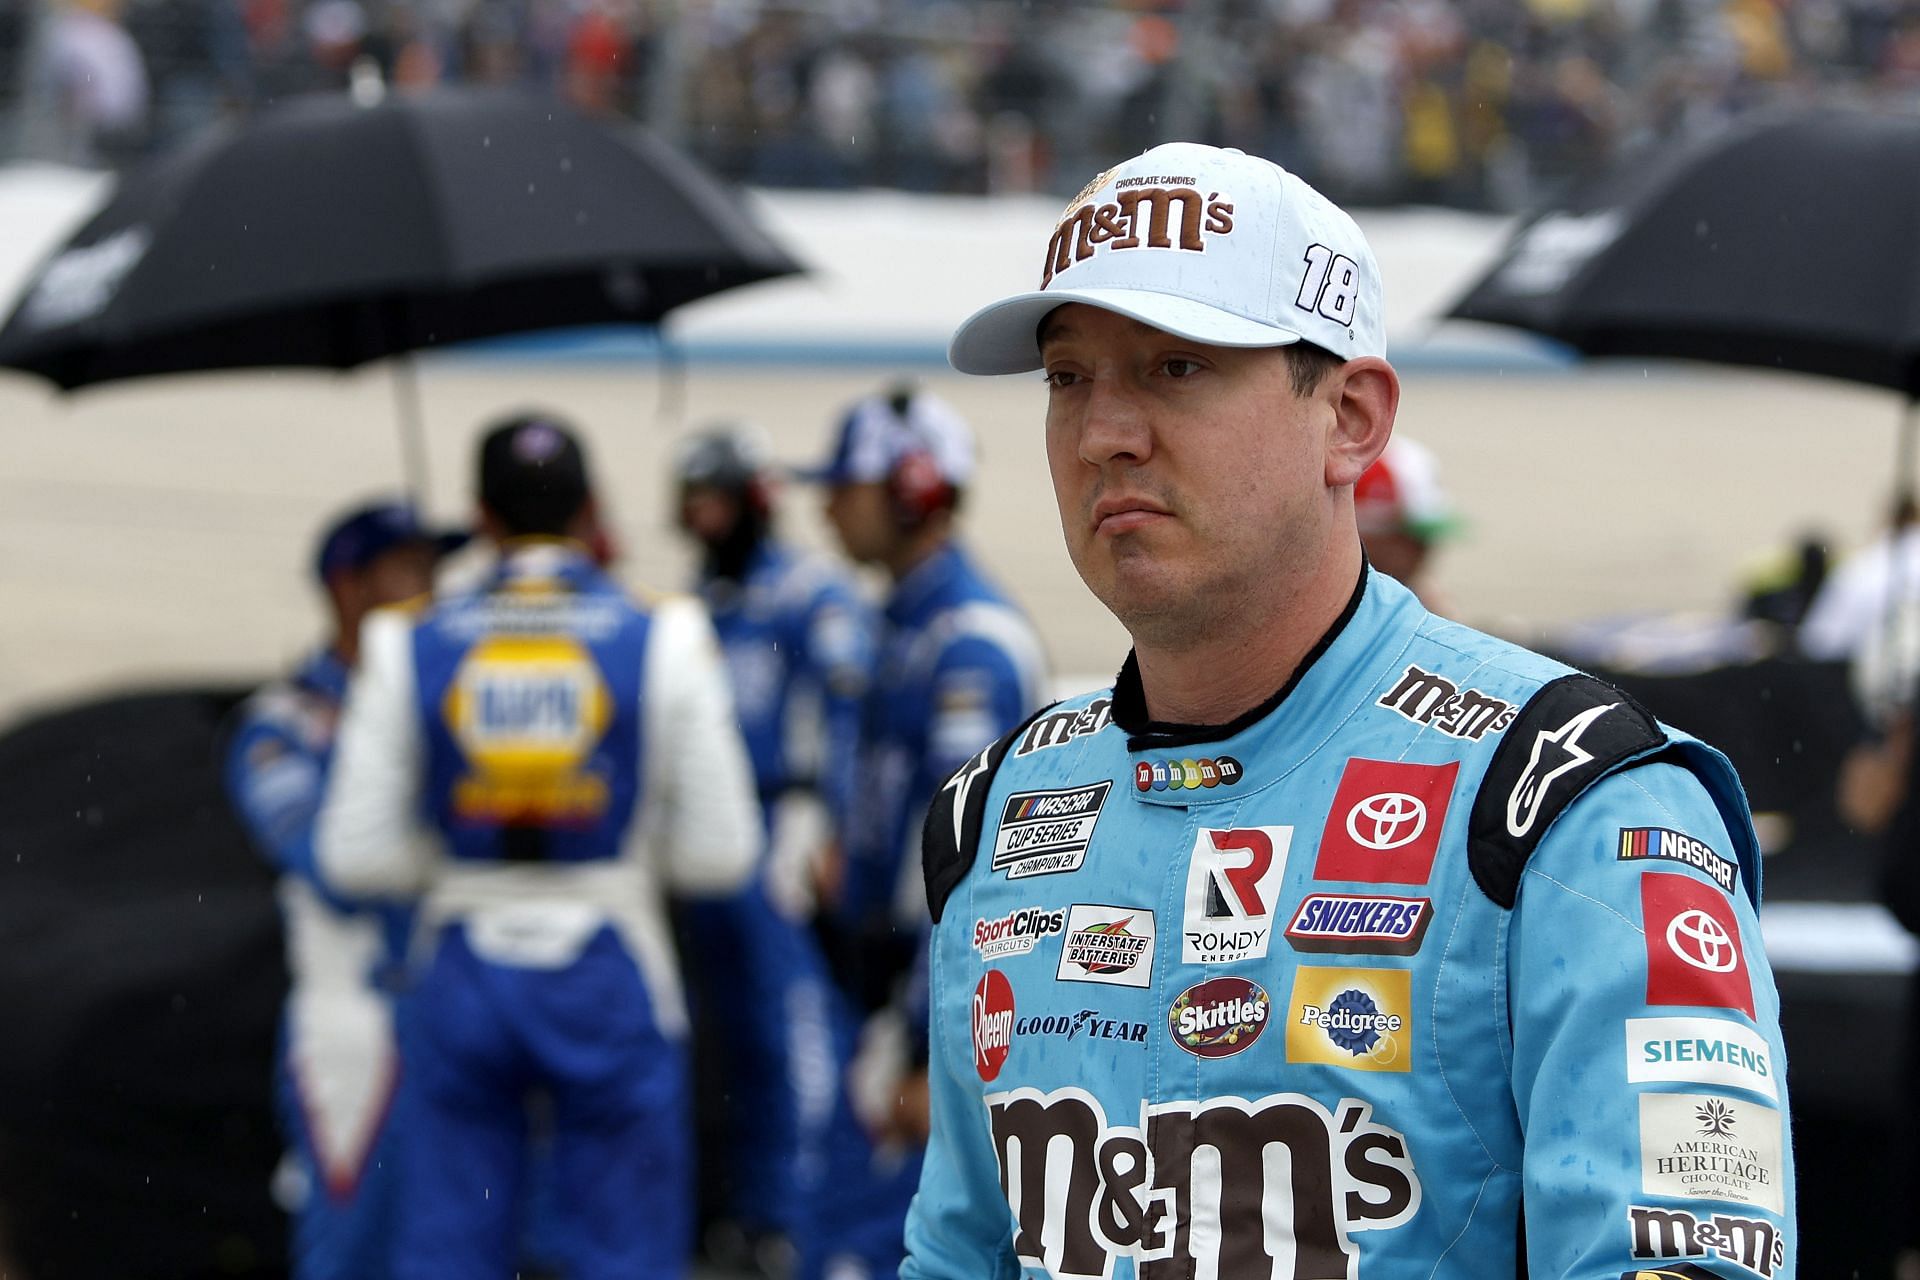 Kyle Busch walks the grid during a rain delay in the 2022 NASCAR Cup Series DuraMAX Drydene 400 presented by RelaDyne at Dover Motor Speedway in Dover, Delaware. (Photo by Sean Gardner/Getty Images)